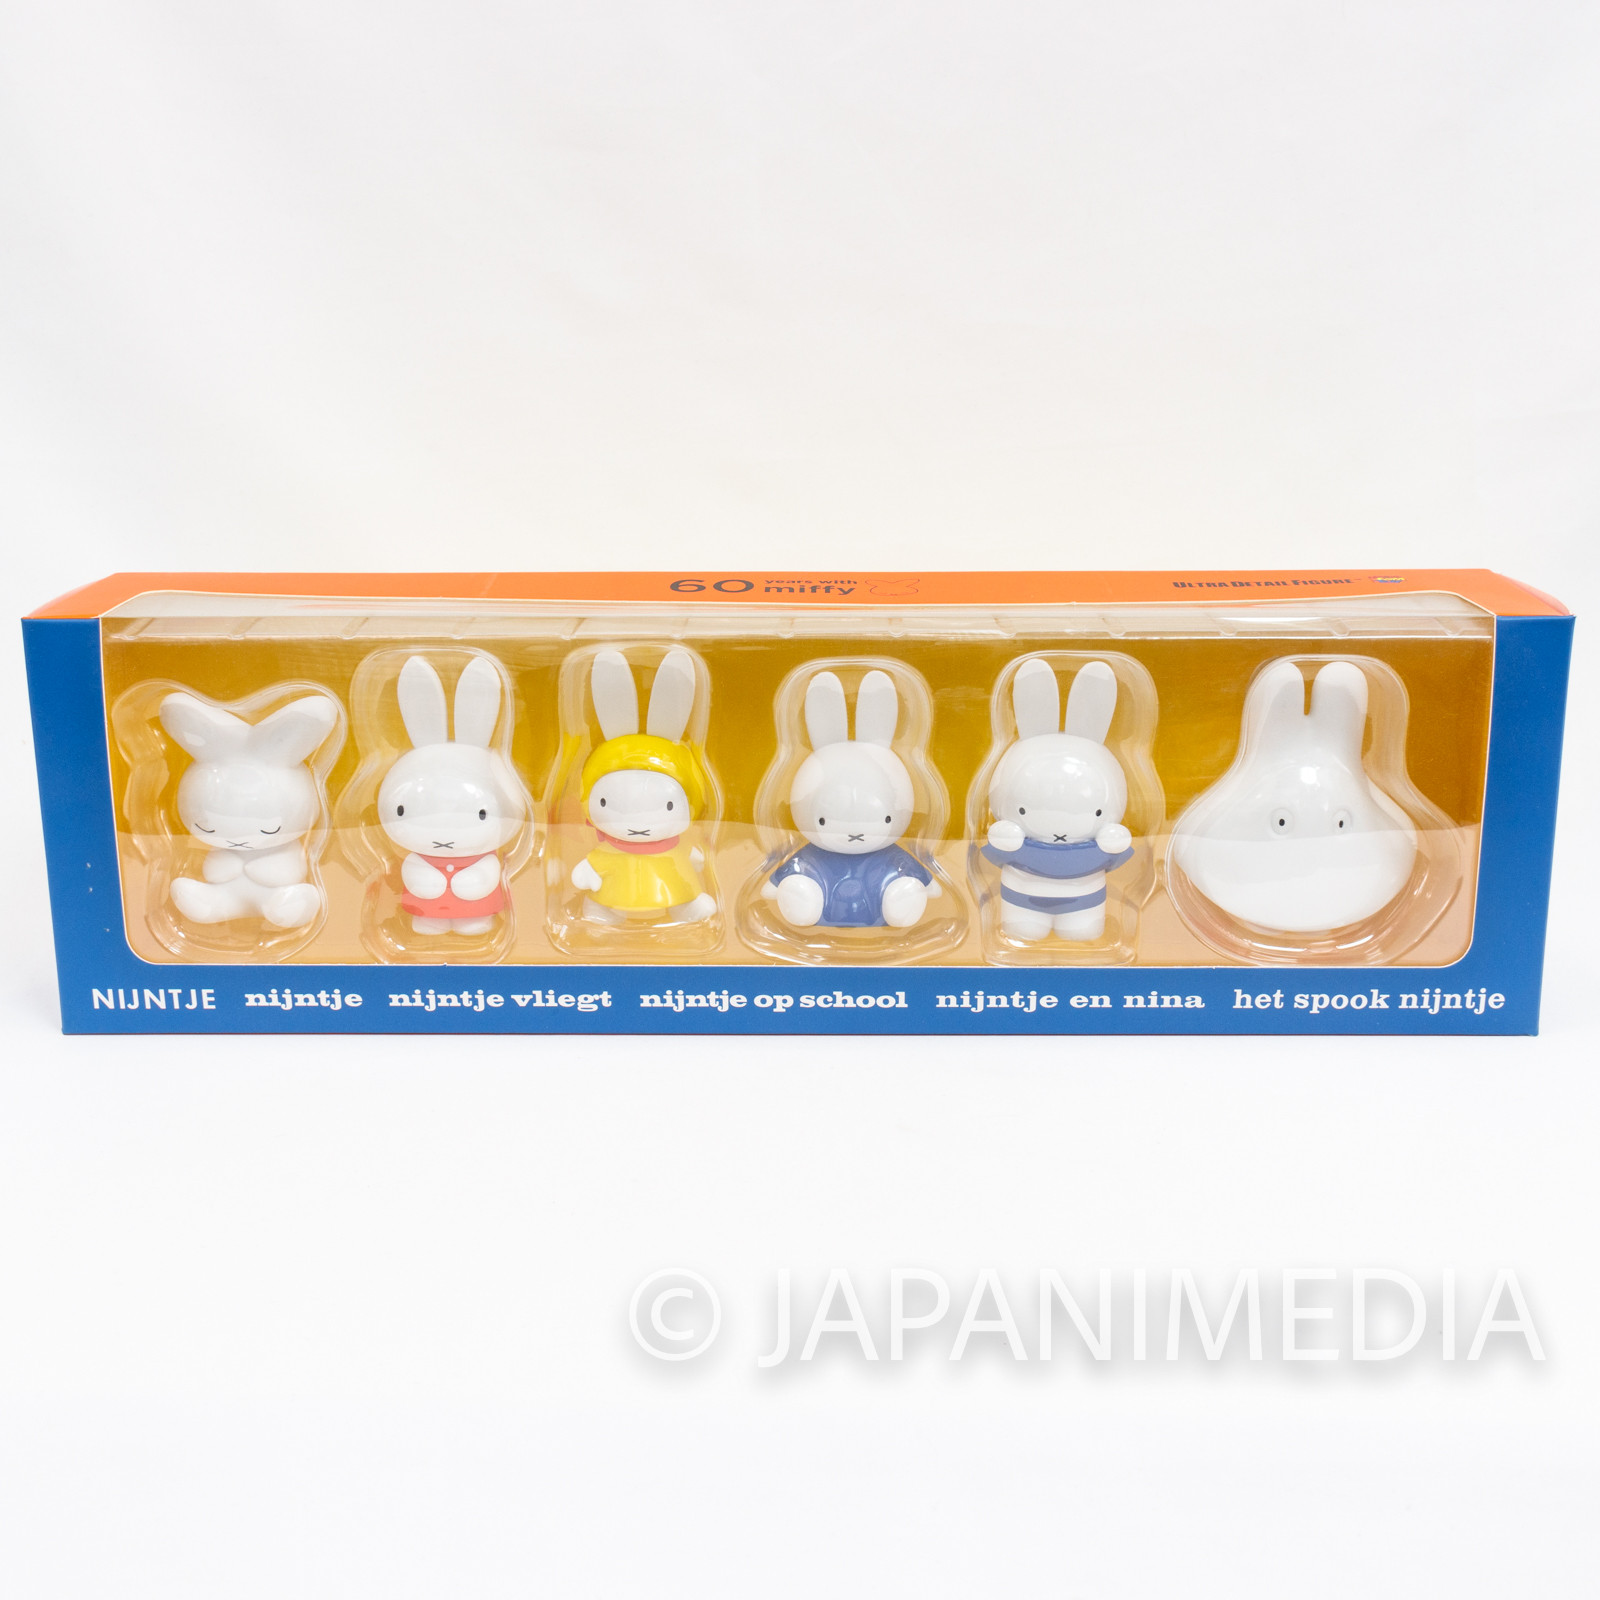 Miffy 60 years with Miffy Ultra Detail Figure Limited 6pc Set Medicom Toy JAPAN